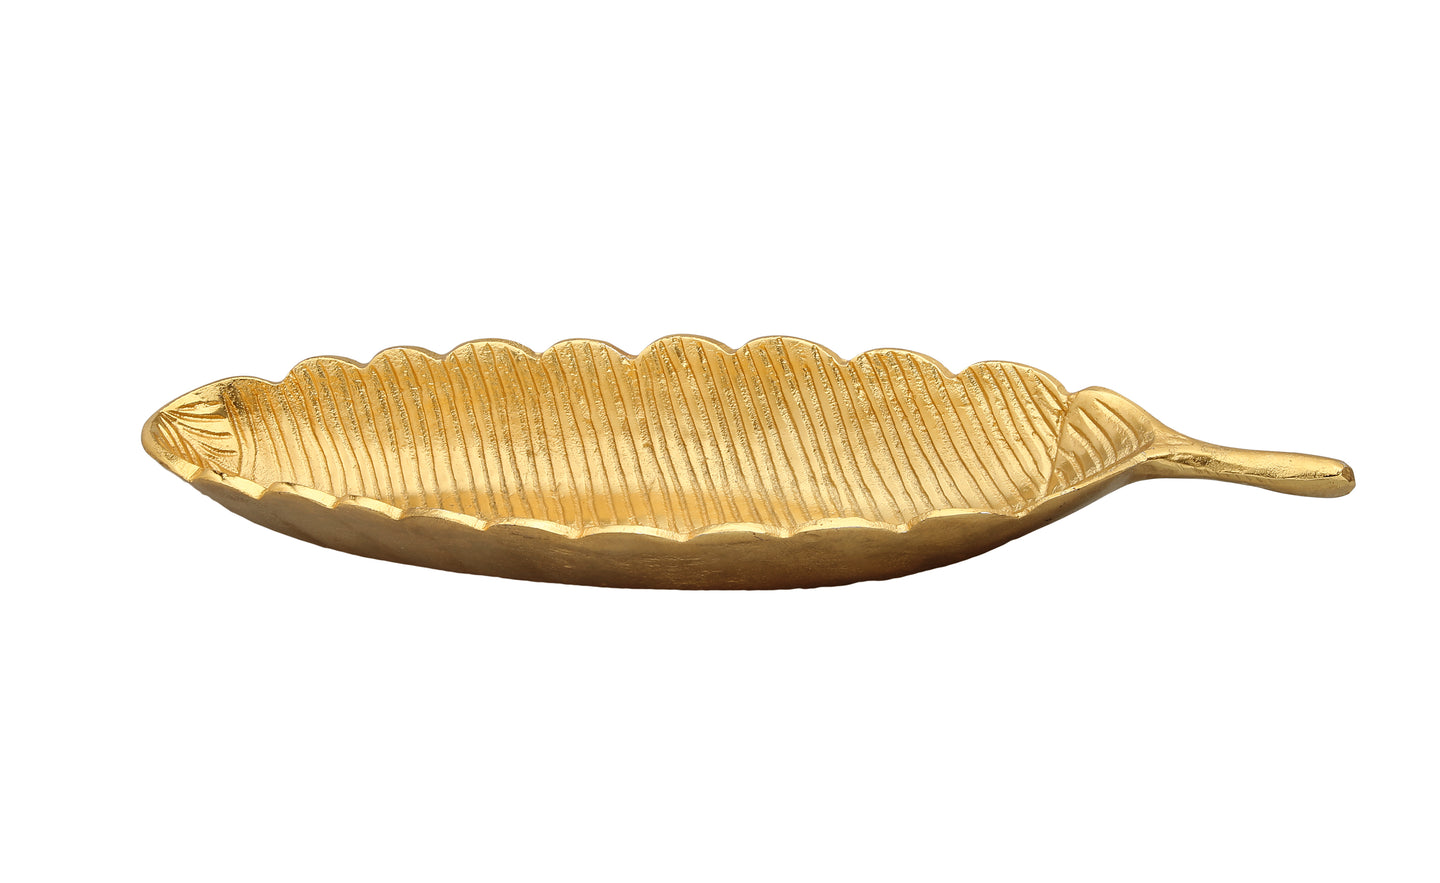 Gold Leaf Shaped Dish with Vein Design